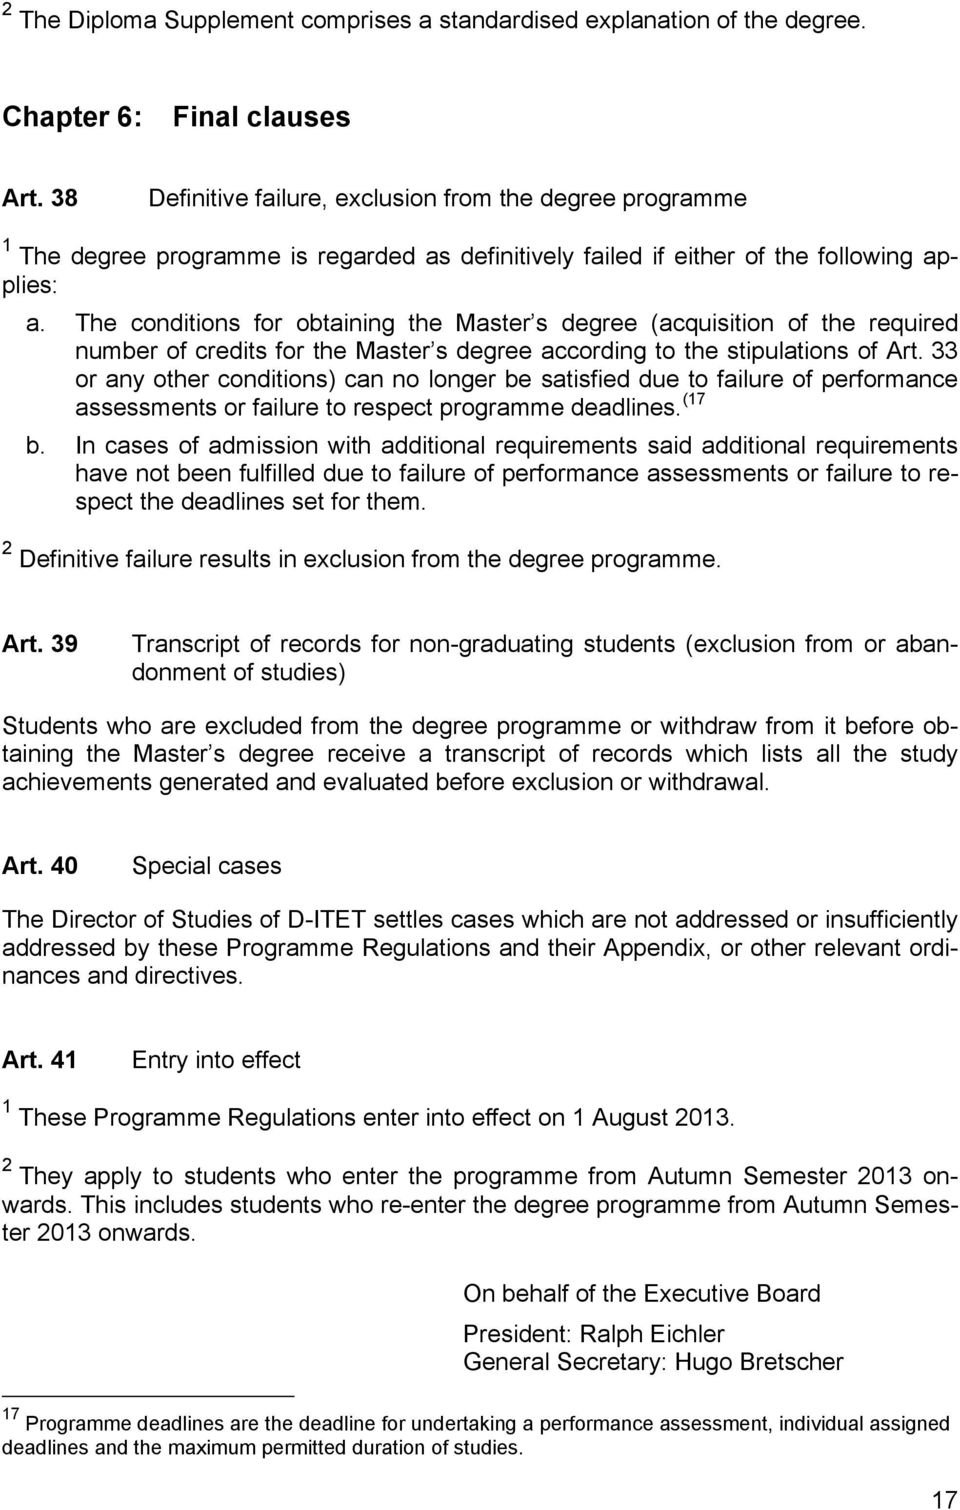 The conditions for obtaining the Master s degree (acquisition of the required number of credits for the Master s degree according to the stipulations of Art.